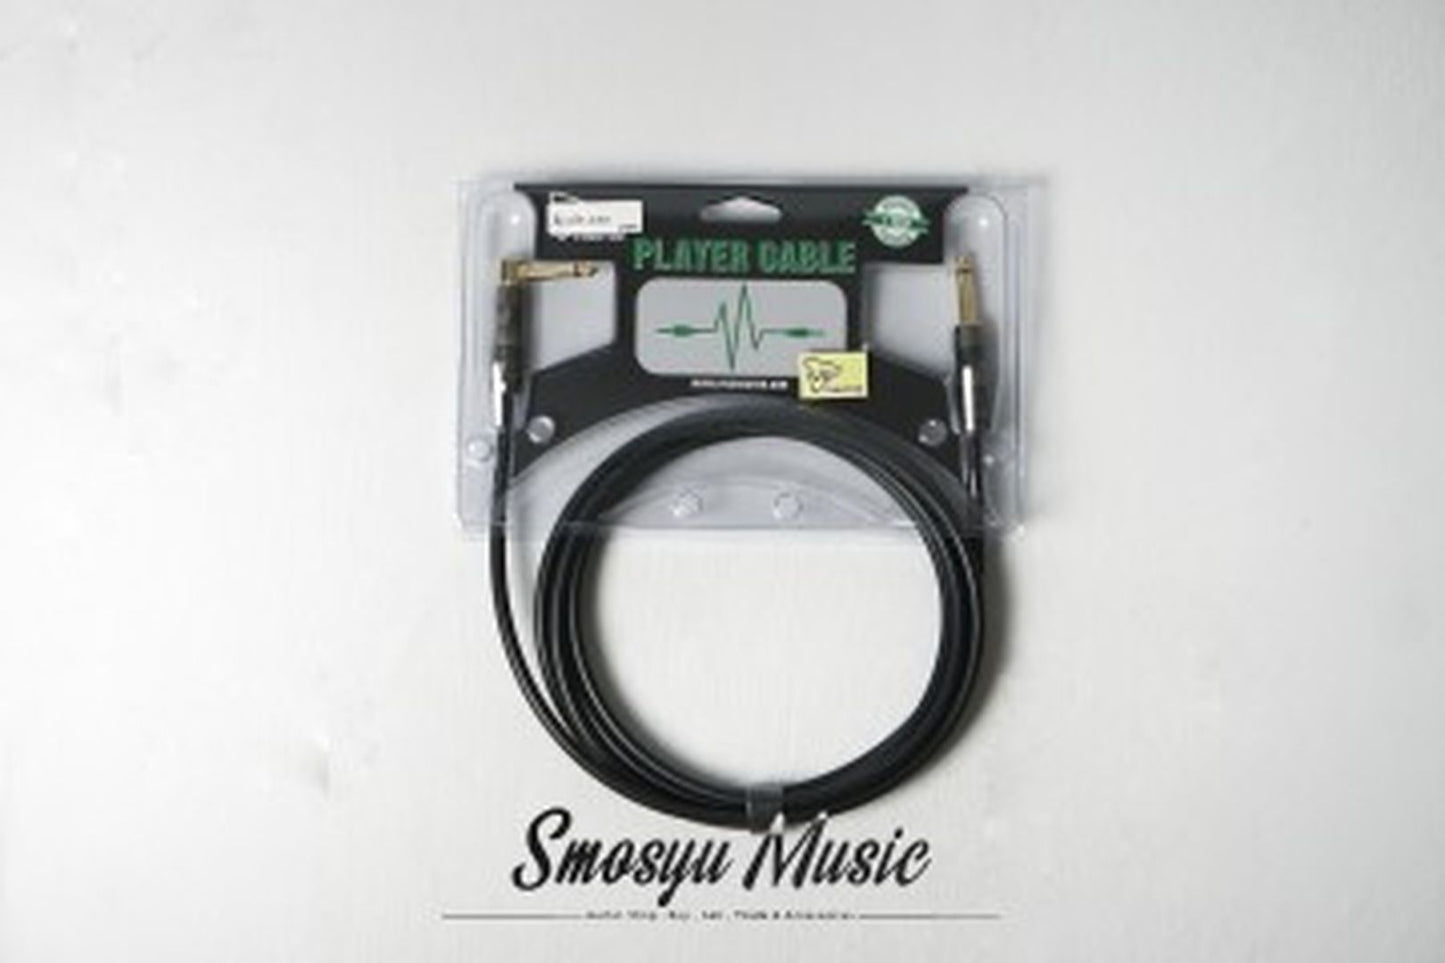 IVU Creator Player Cable S/L 3M